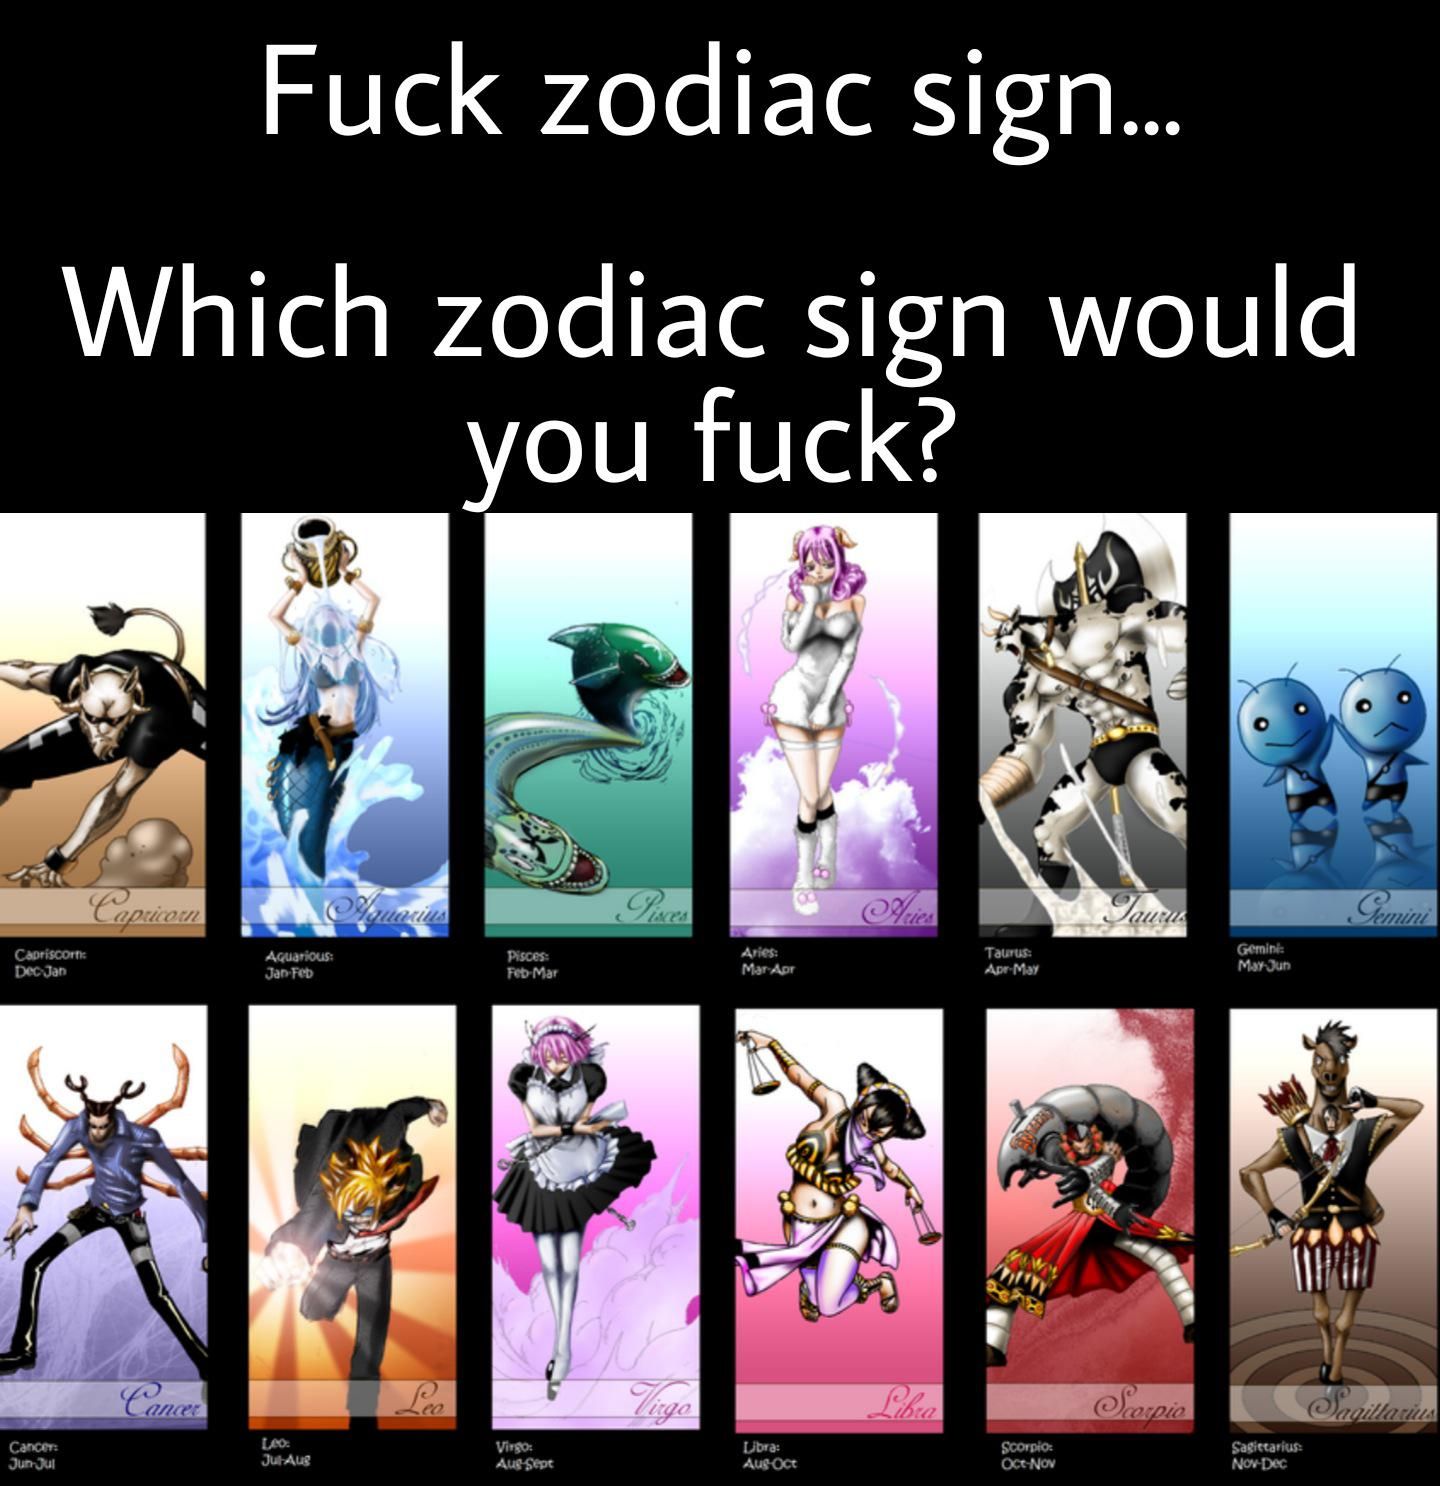 I personally would choose Virgo